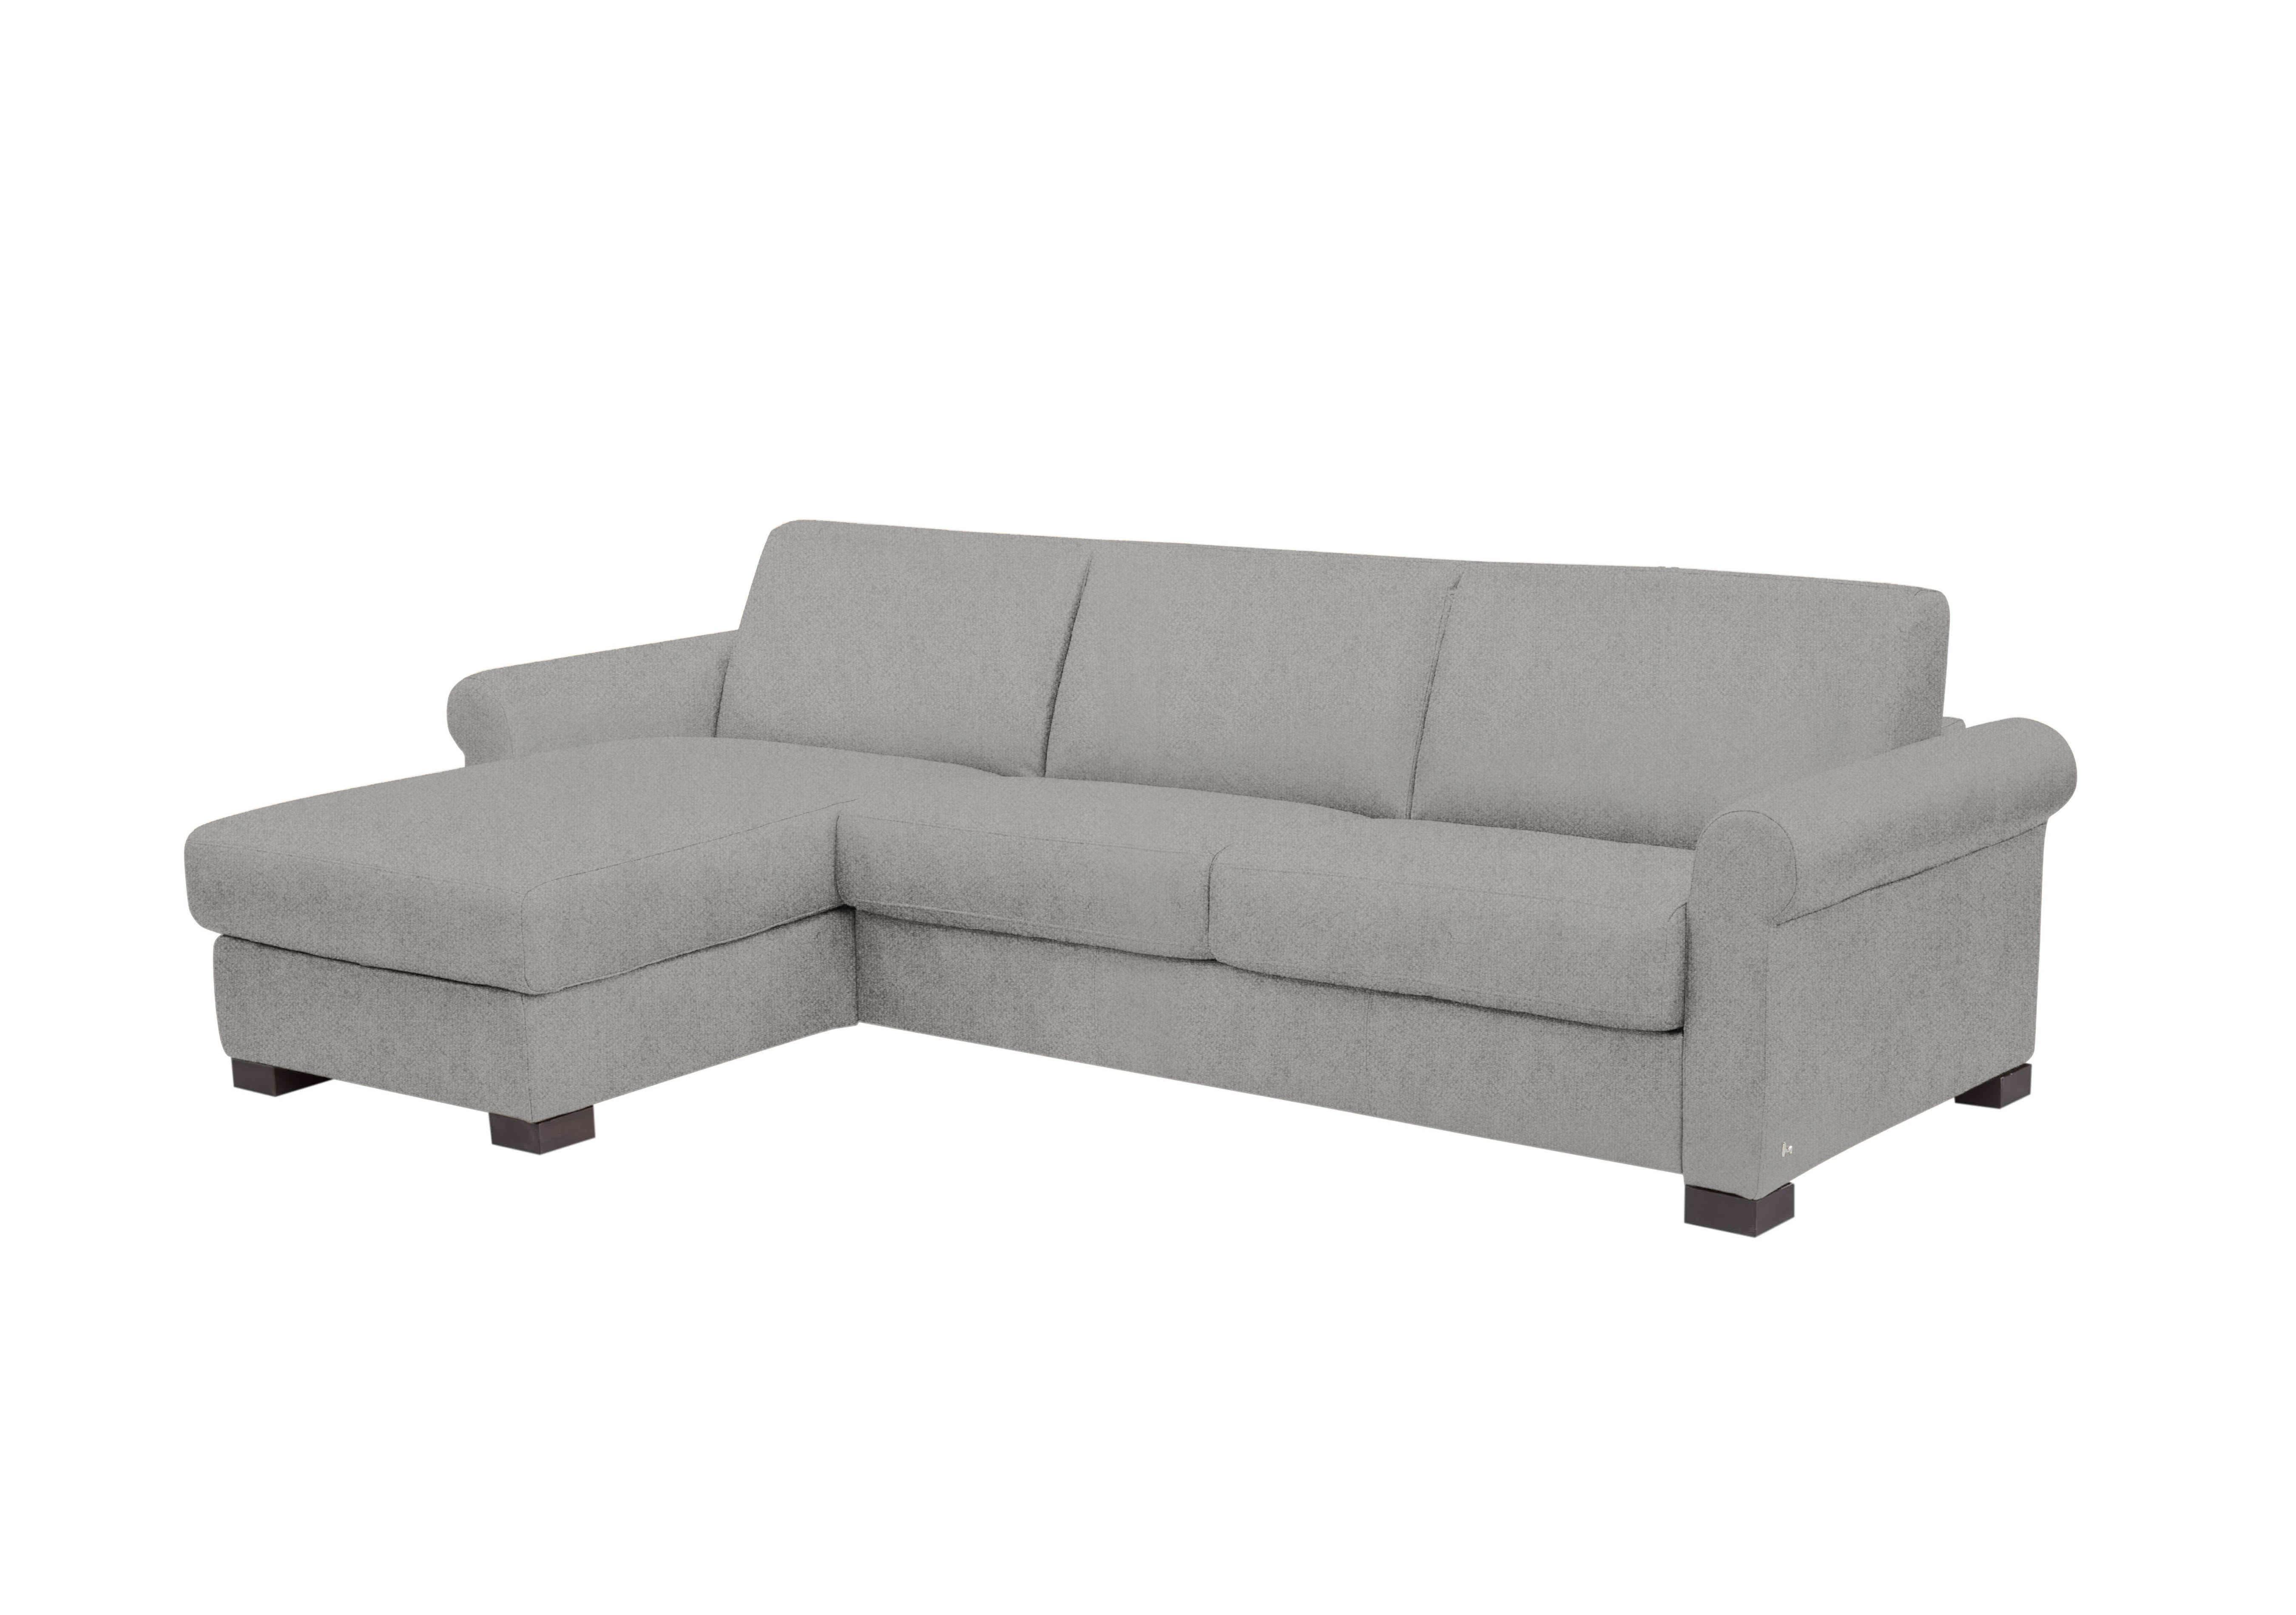 Alcova 3 Seater Fabric Sofa Bed with Storage Chaise with Scroll Arms in Fuente Ash on Furniture Village